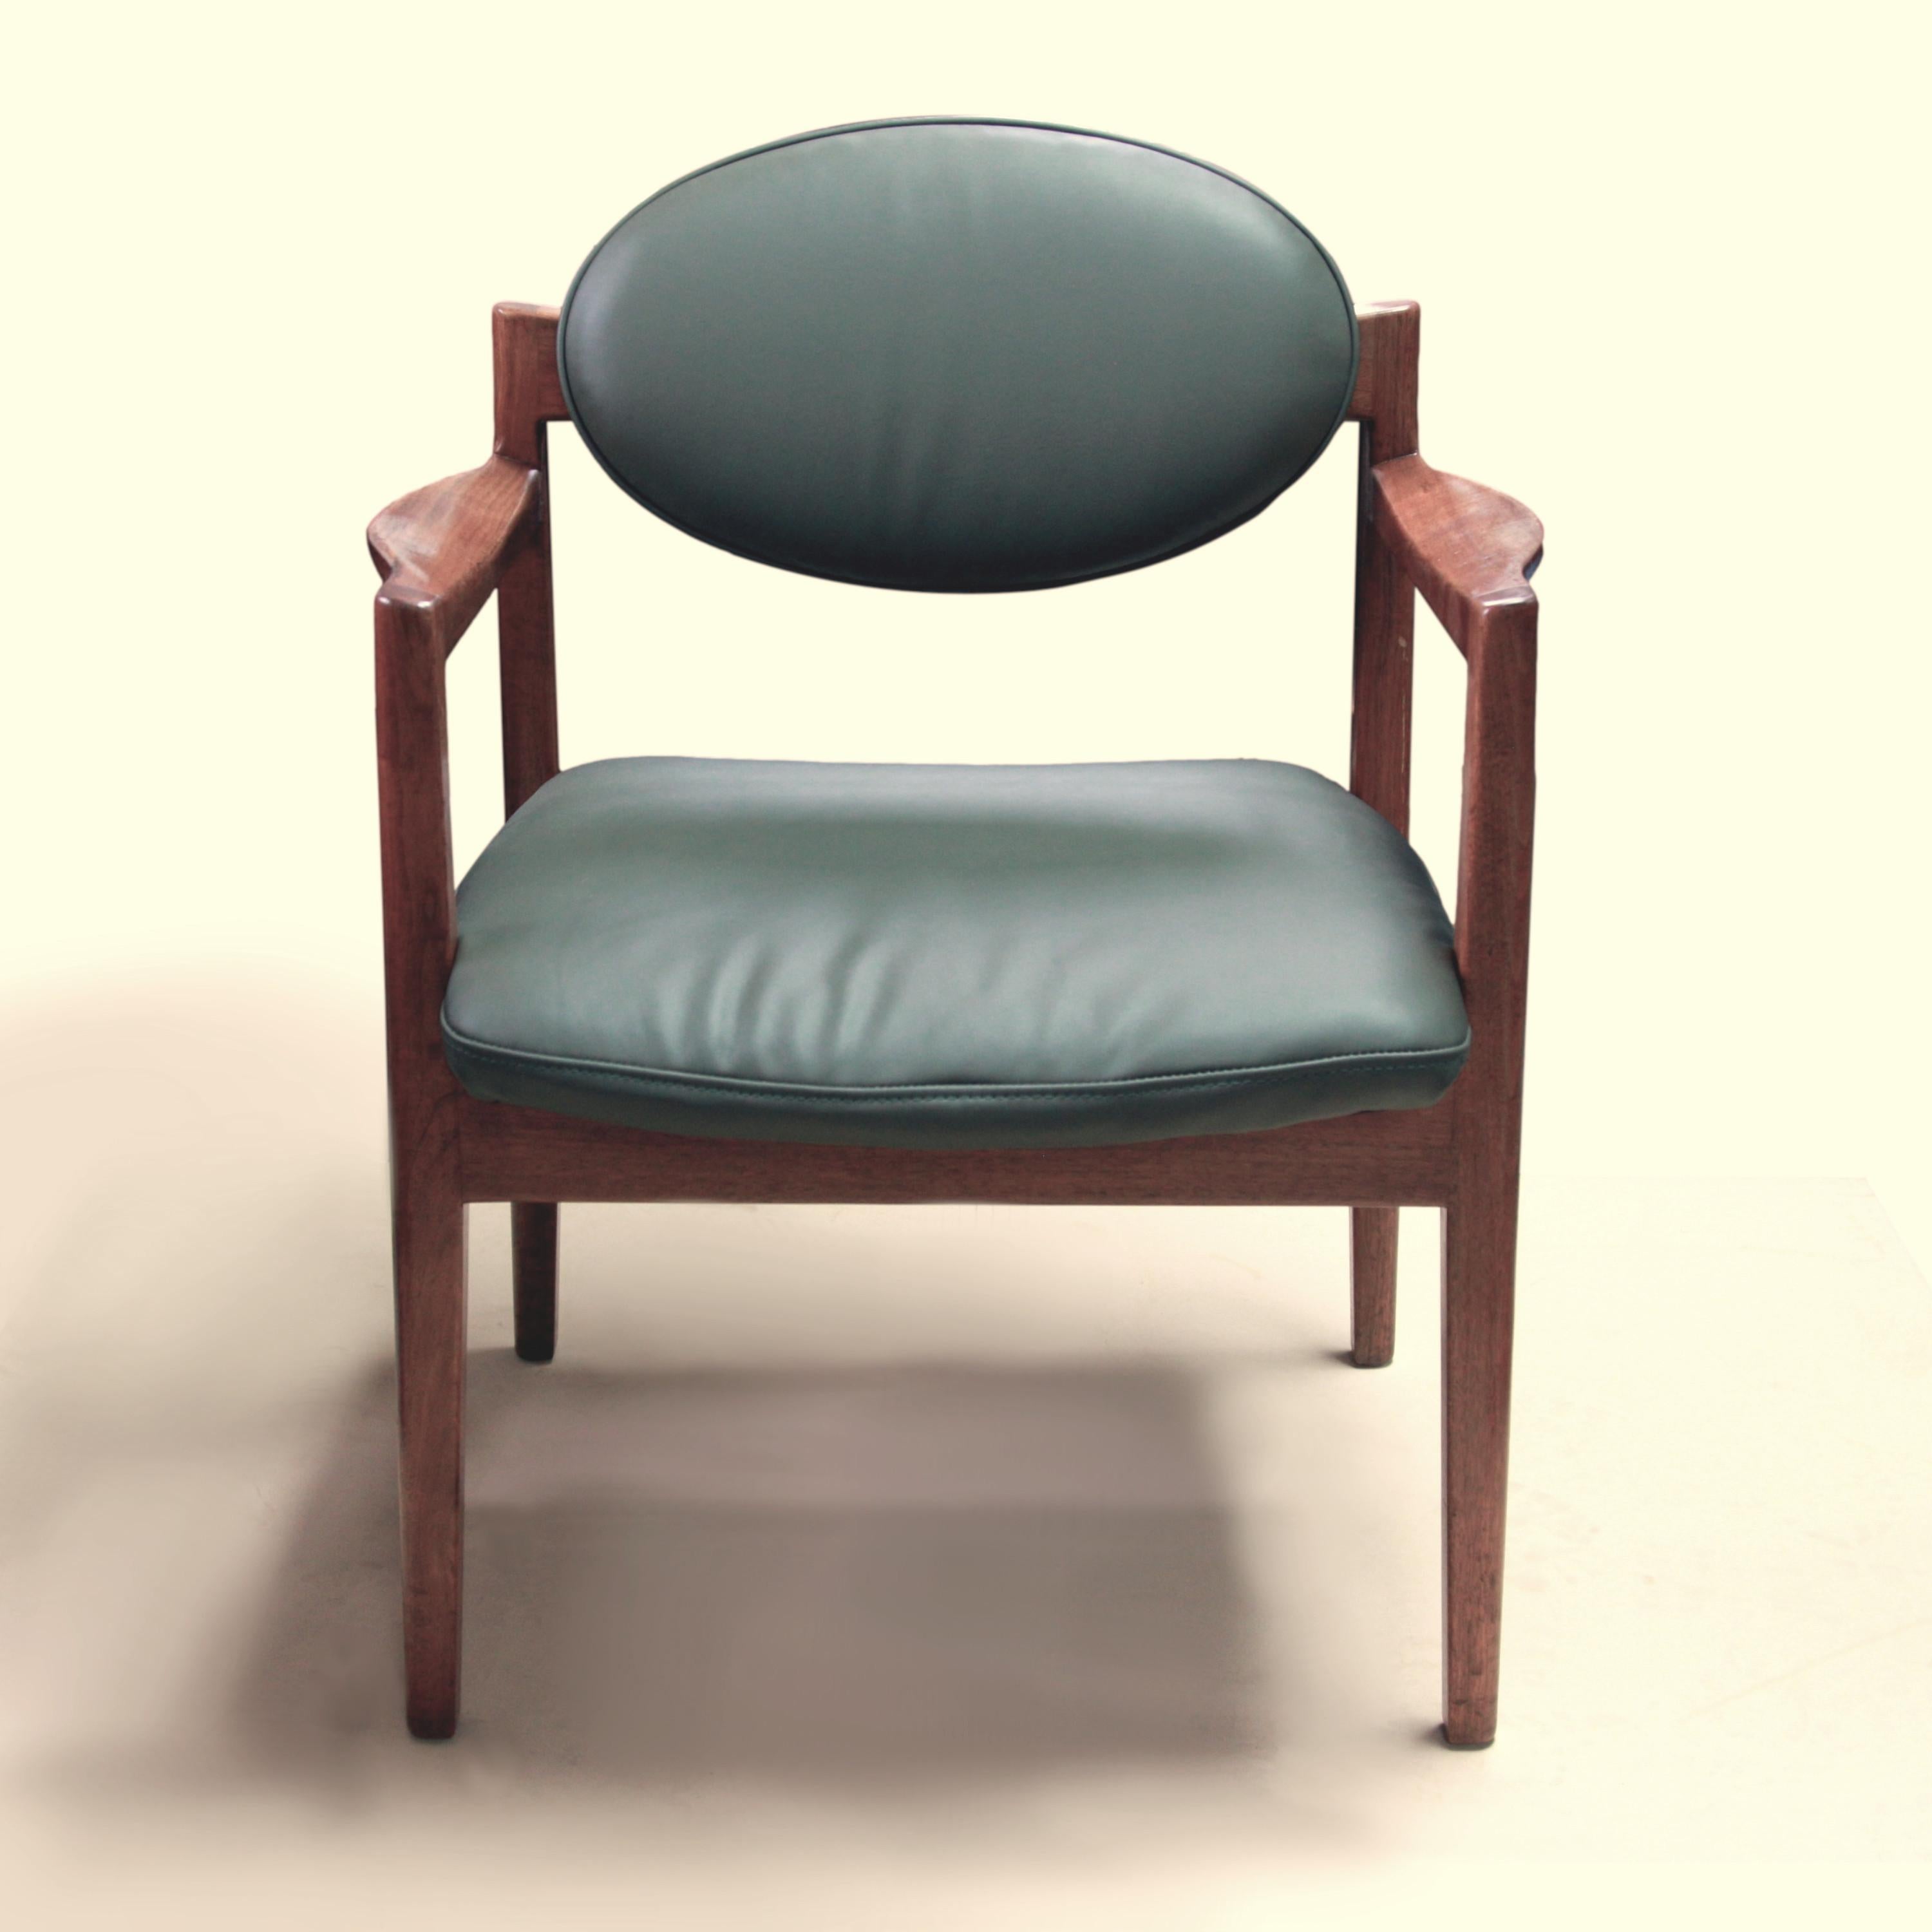 Pair of Mid-Century Modern Green Leather Oval-Back Armchairs Chair by Jens Risom For Sale 2